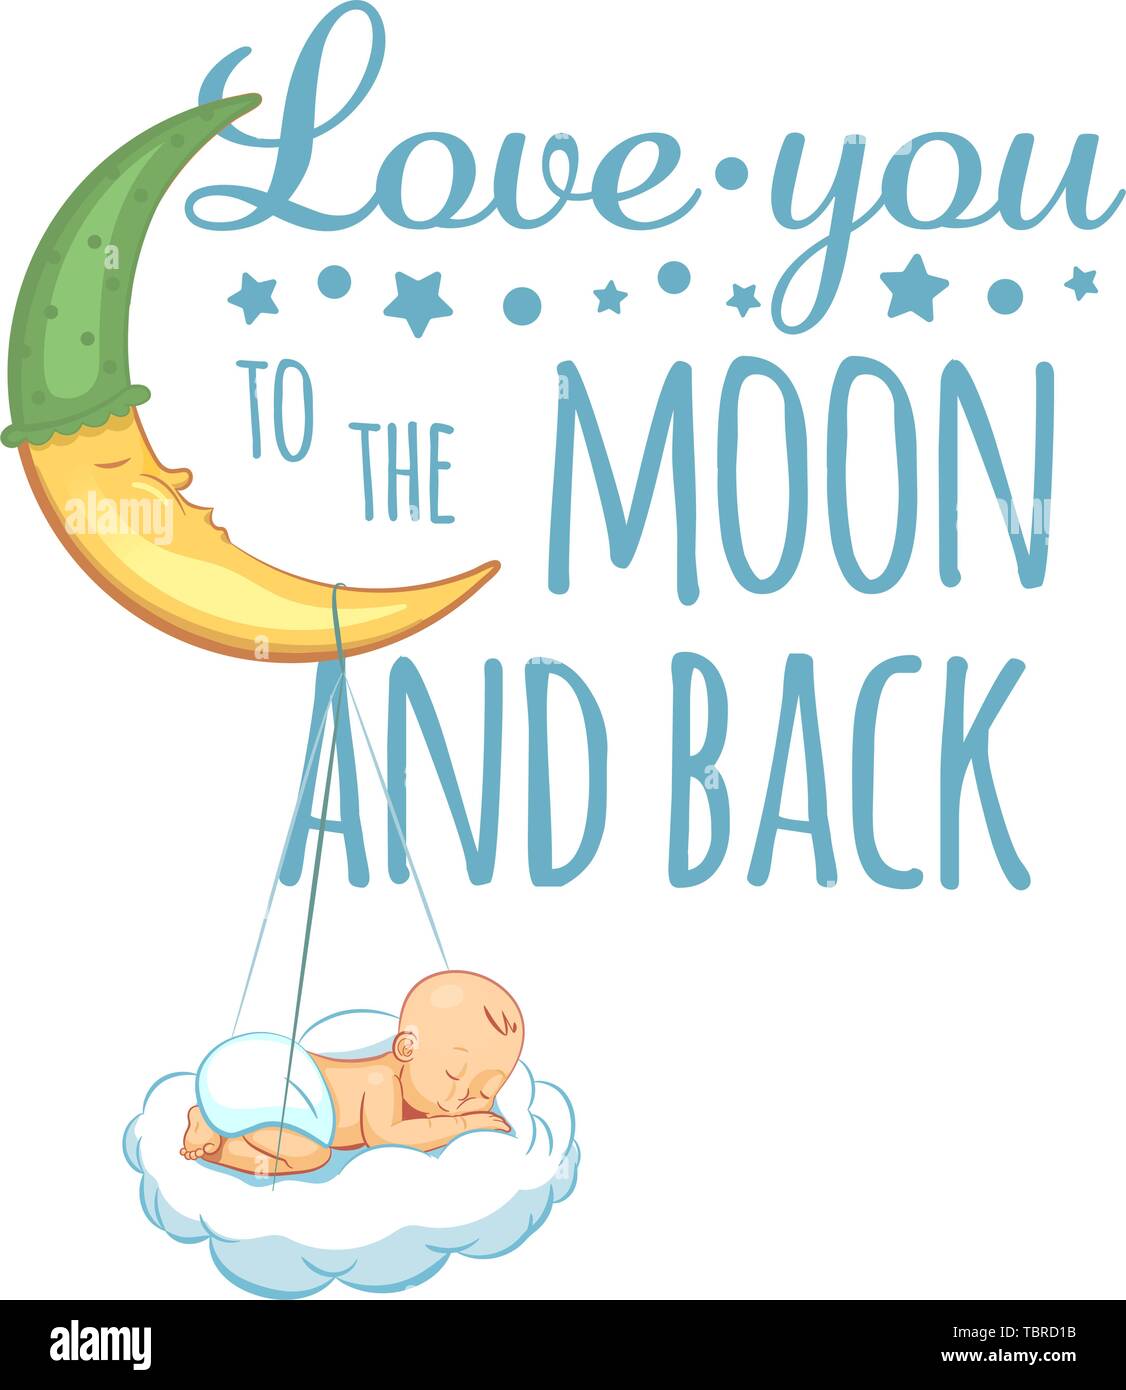 Love You To The Moon And Back Hand Lettering Quotes To Print On Babies Clothes Nursery Decorations Bags Posters Invitations Cards Vector Stock Vector Image Art Alamy